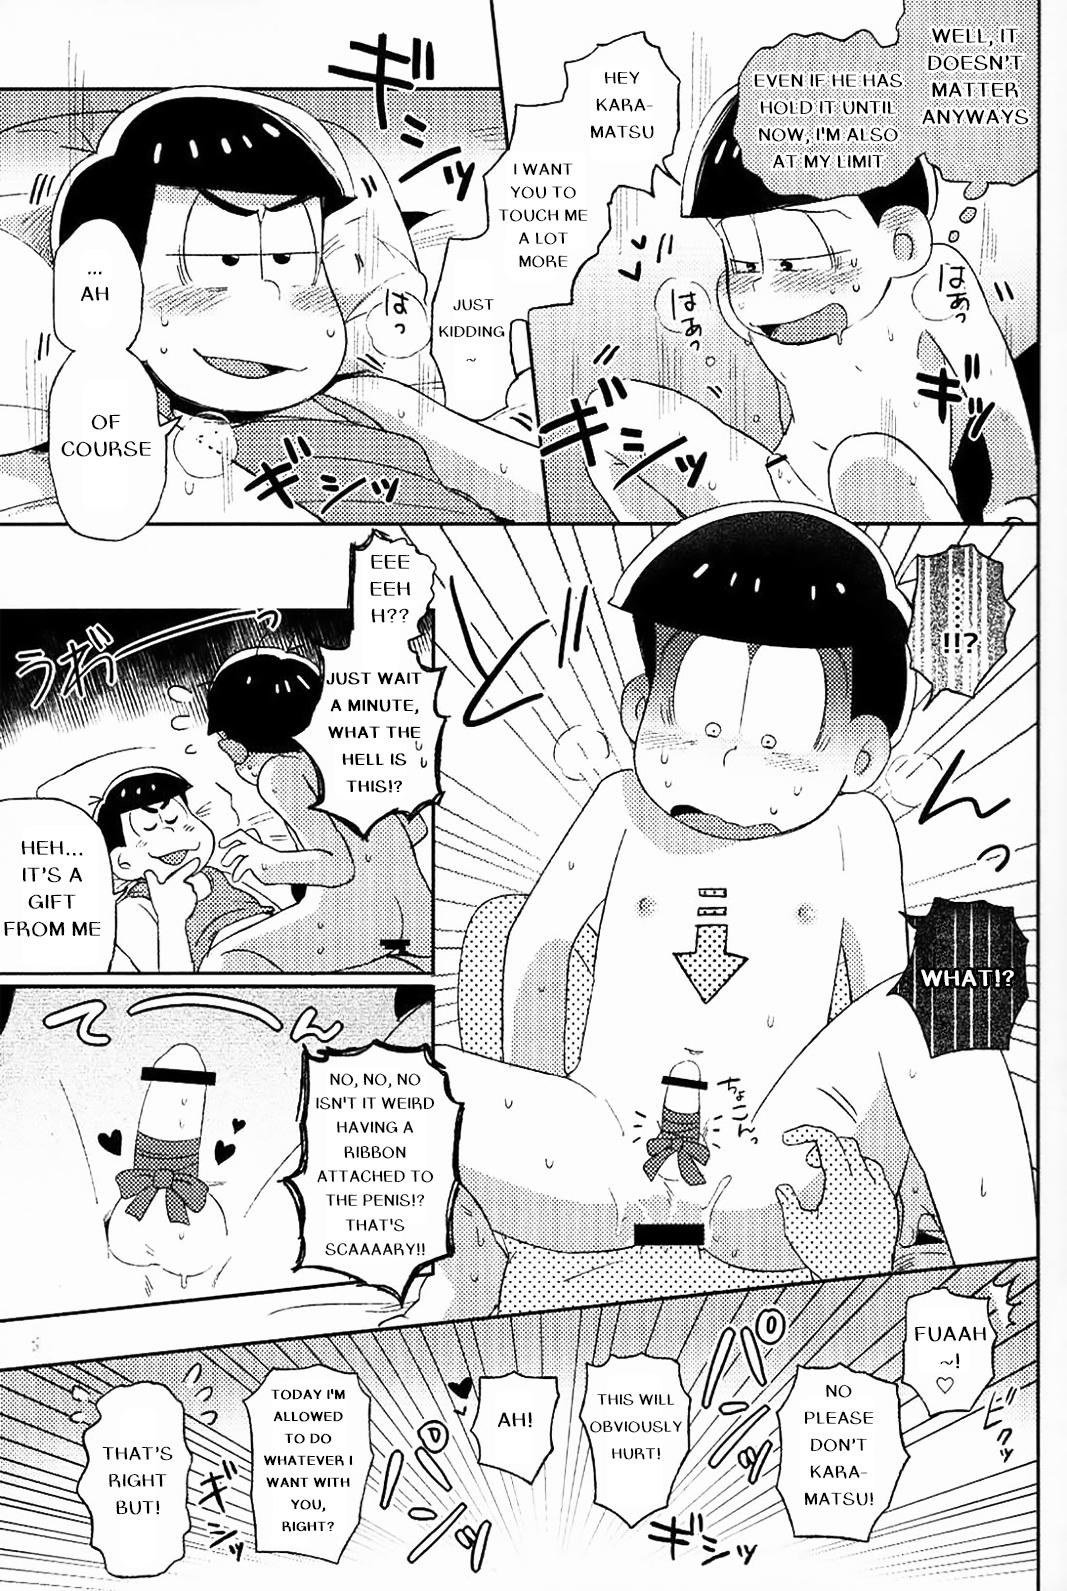 Relax Feeling Horny!! - Osomatsu san Chat - Page 7